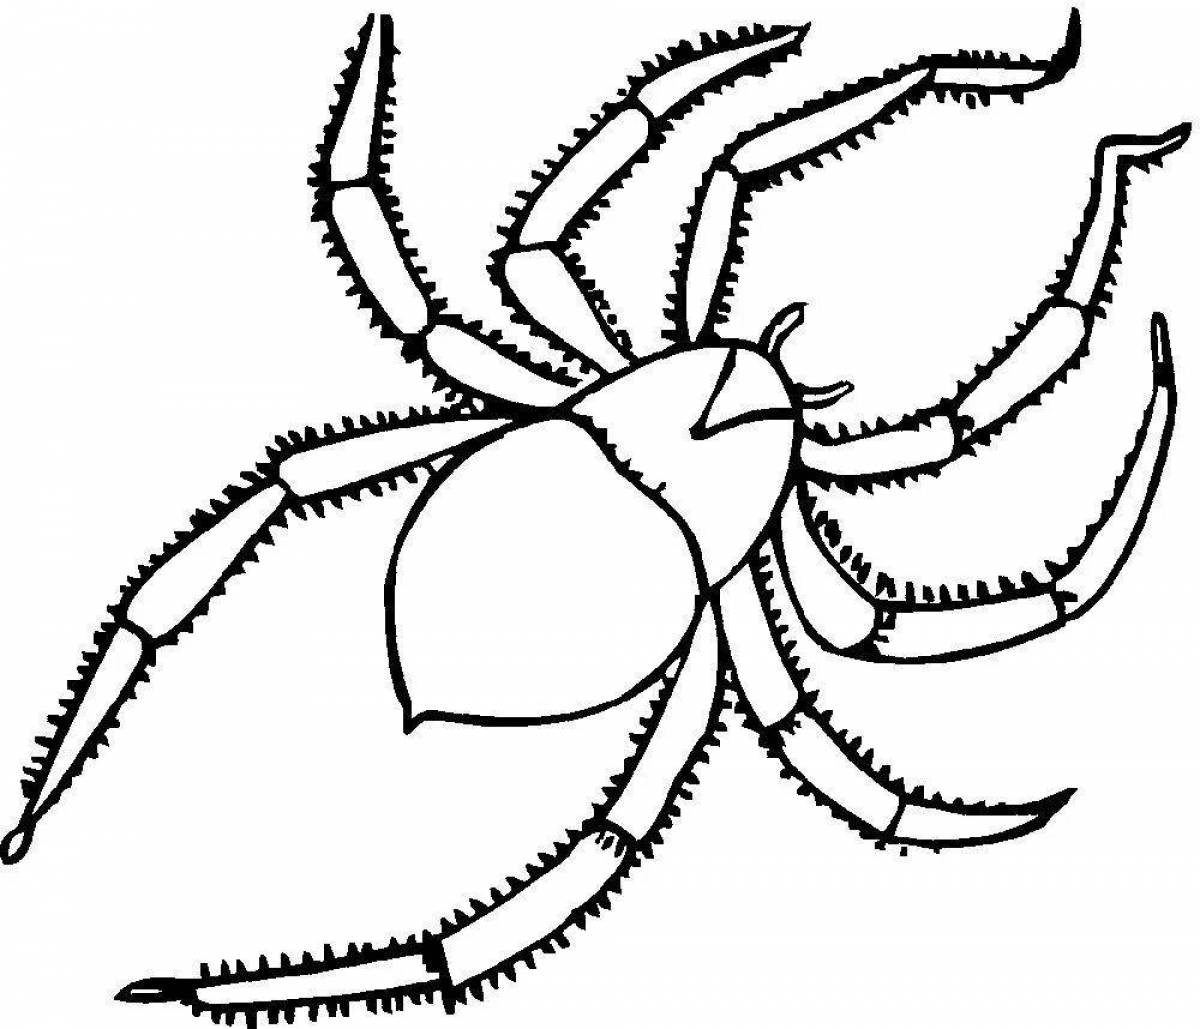 Coloring page adorable spider